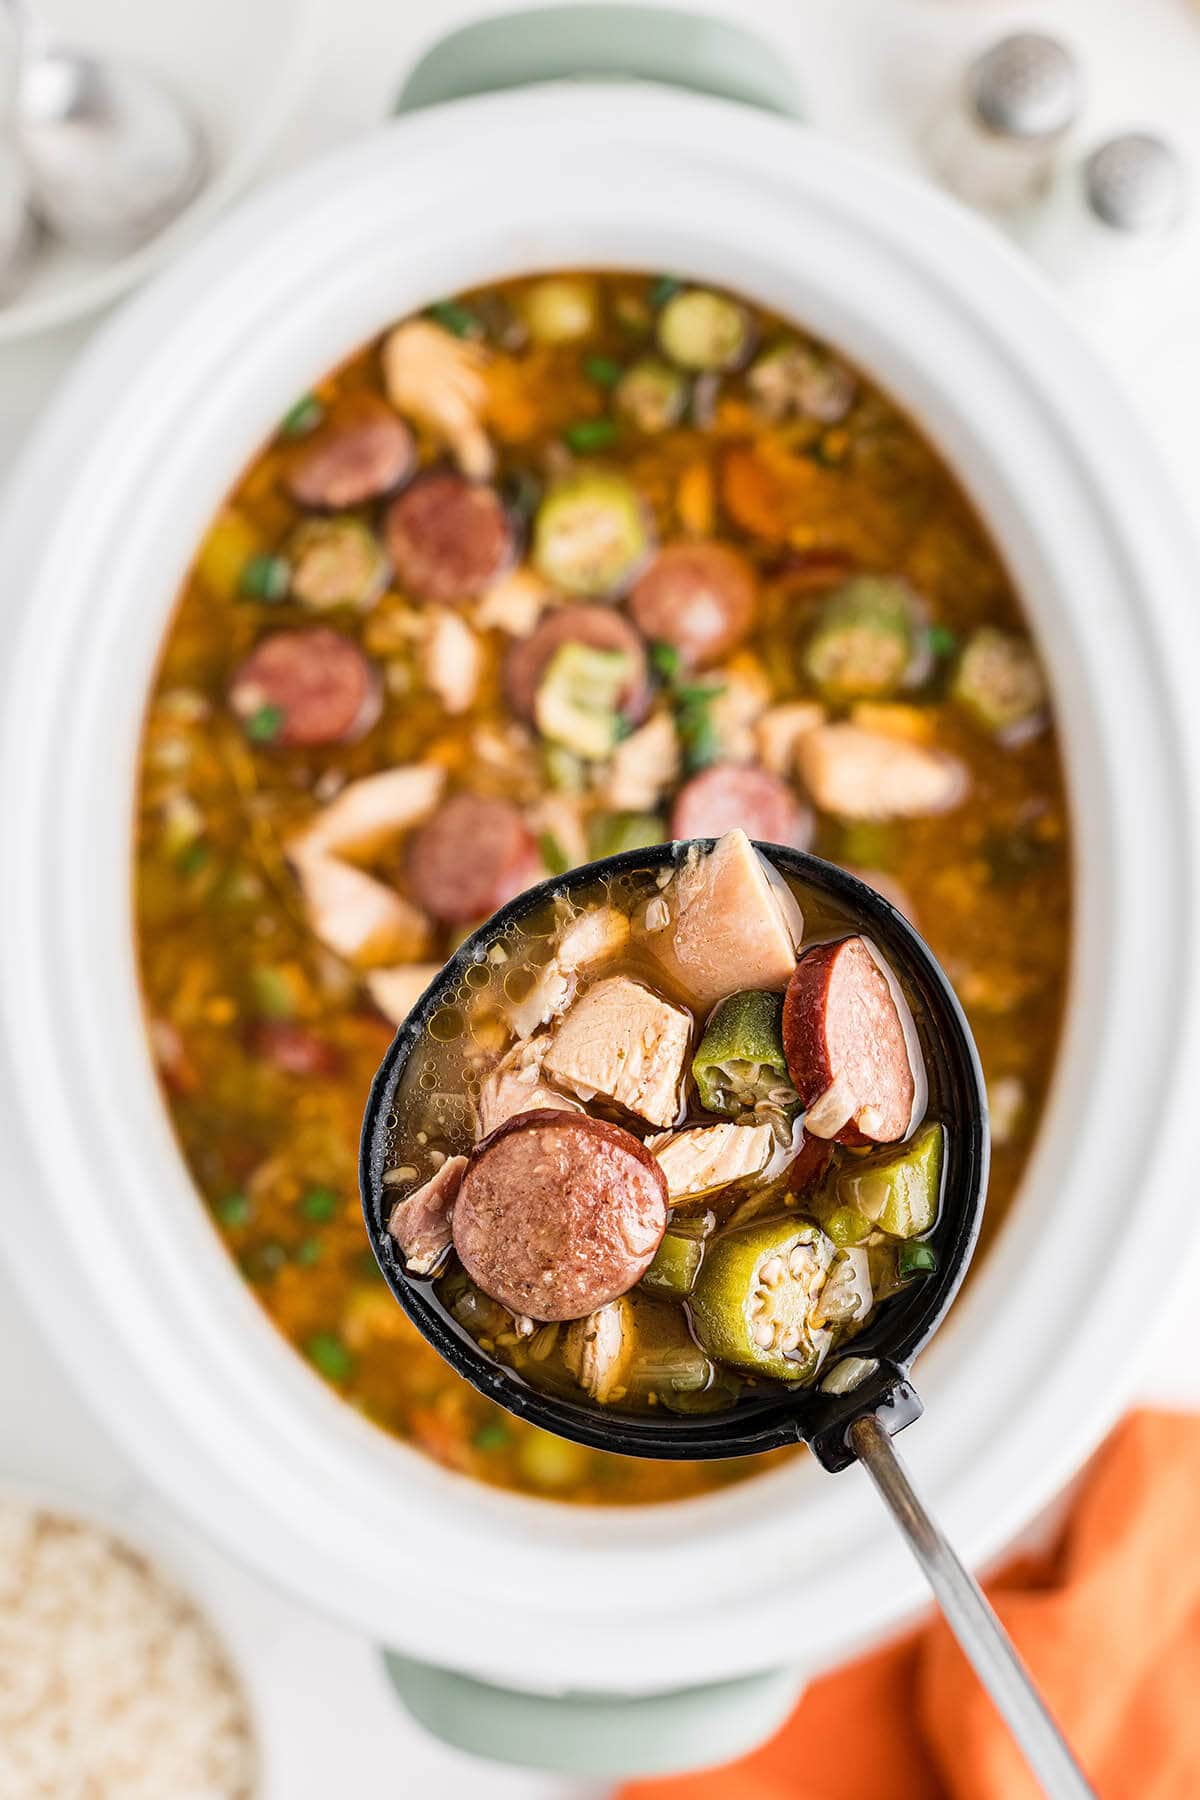 Crockpot filled with Chicken and Sausage Gumbo with ladle scooping up a serving.